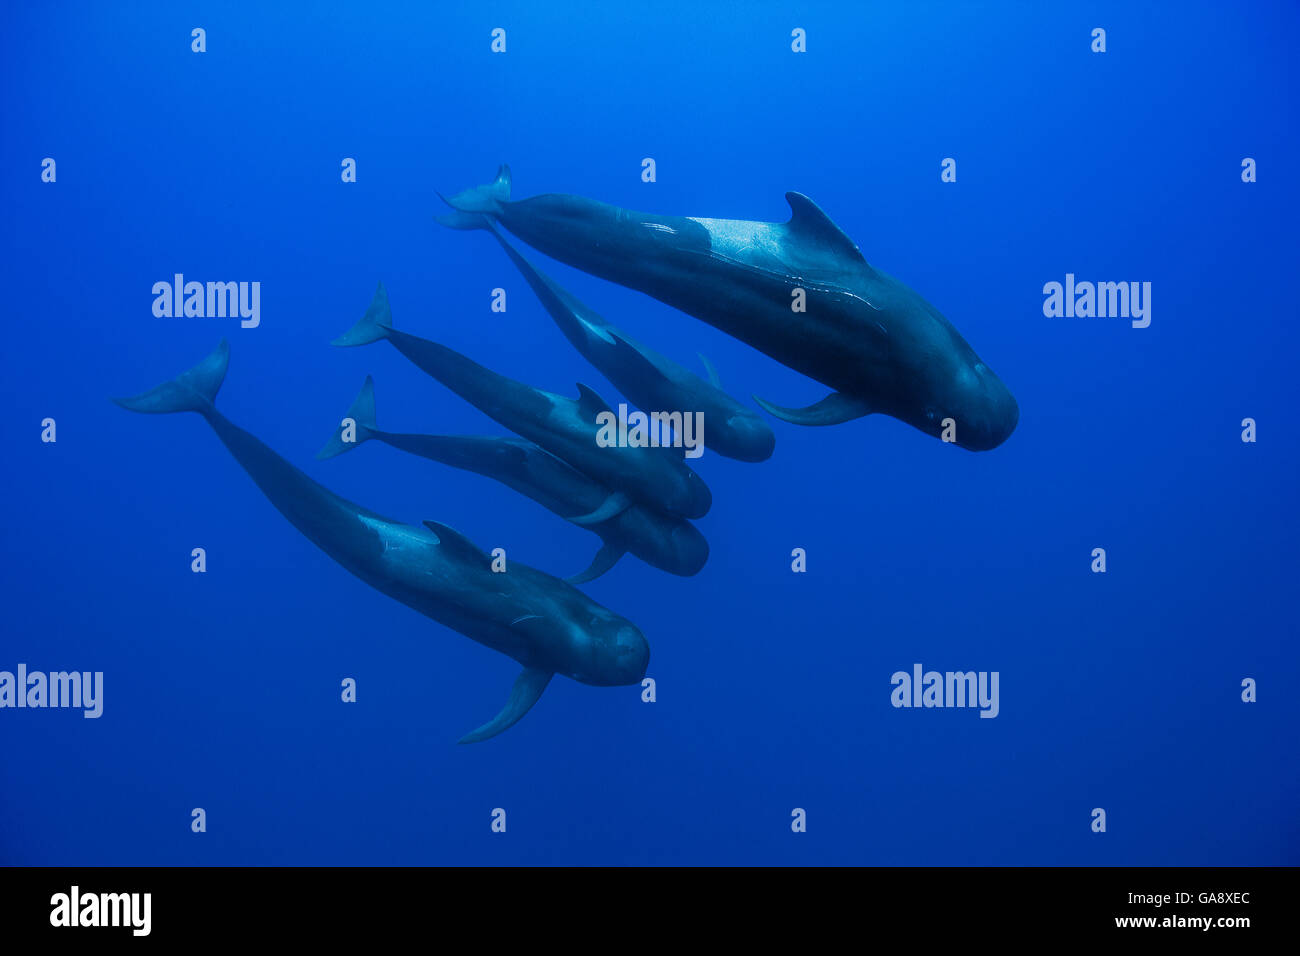 Group of Short-finned pilot whales (Globicephala macrorhynchus) in open water, maybe the whole family with the male, the female and the calves, Costa Rica. Pacific ocean. Stock Photo